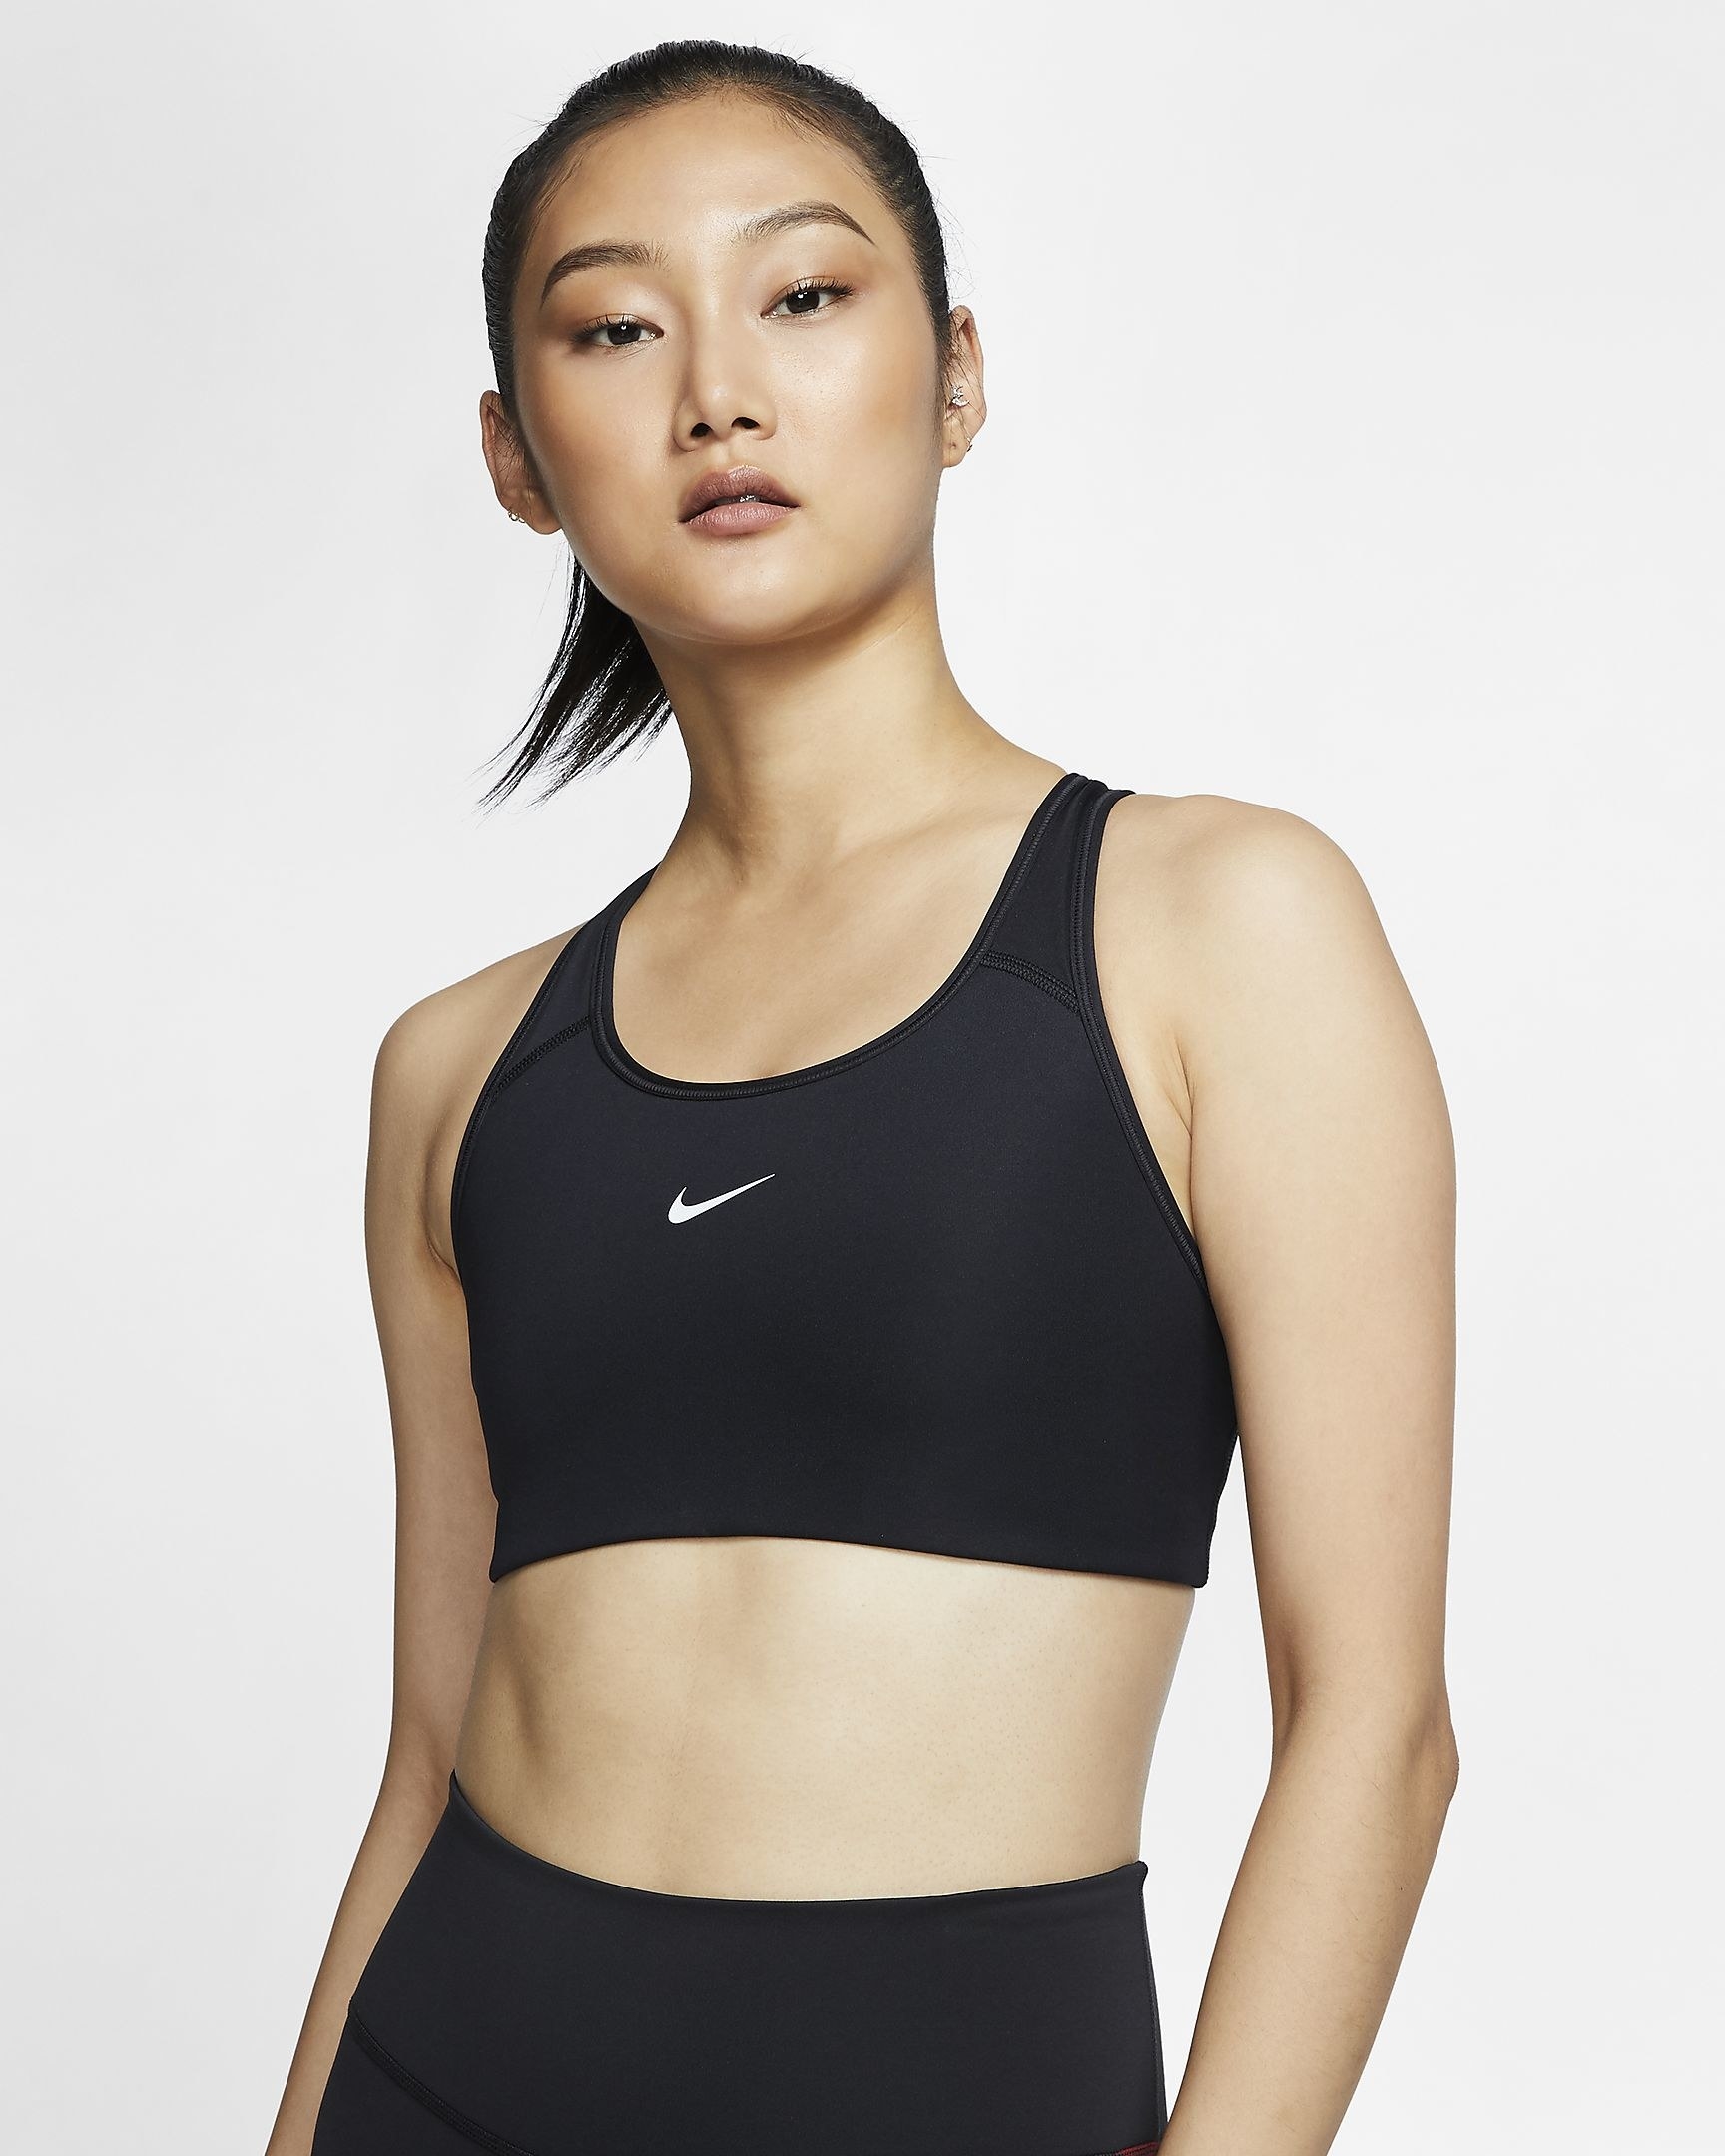 Model wearing black bra with white Nike swoosh in the top center